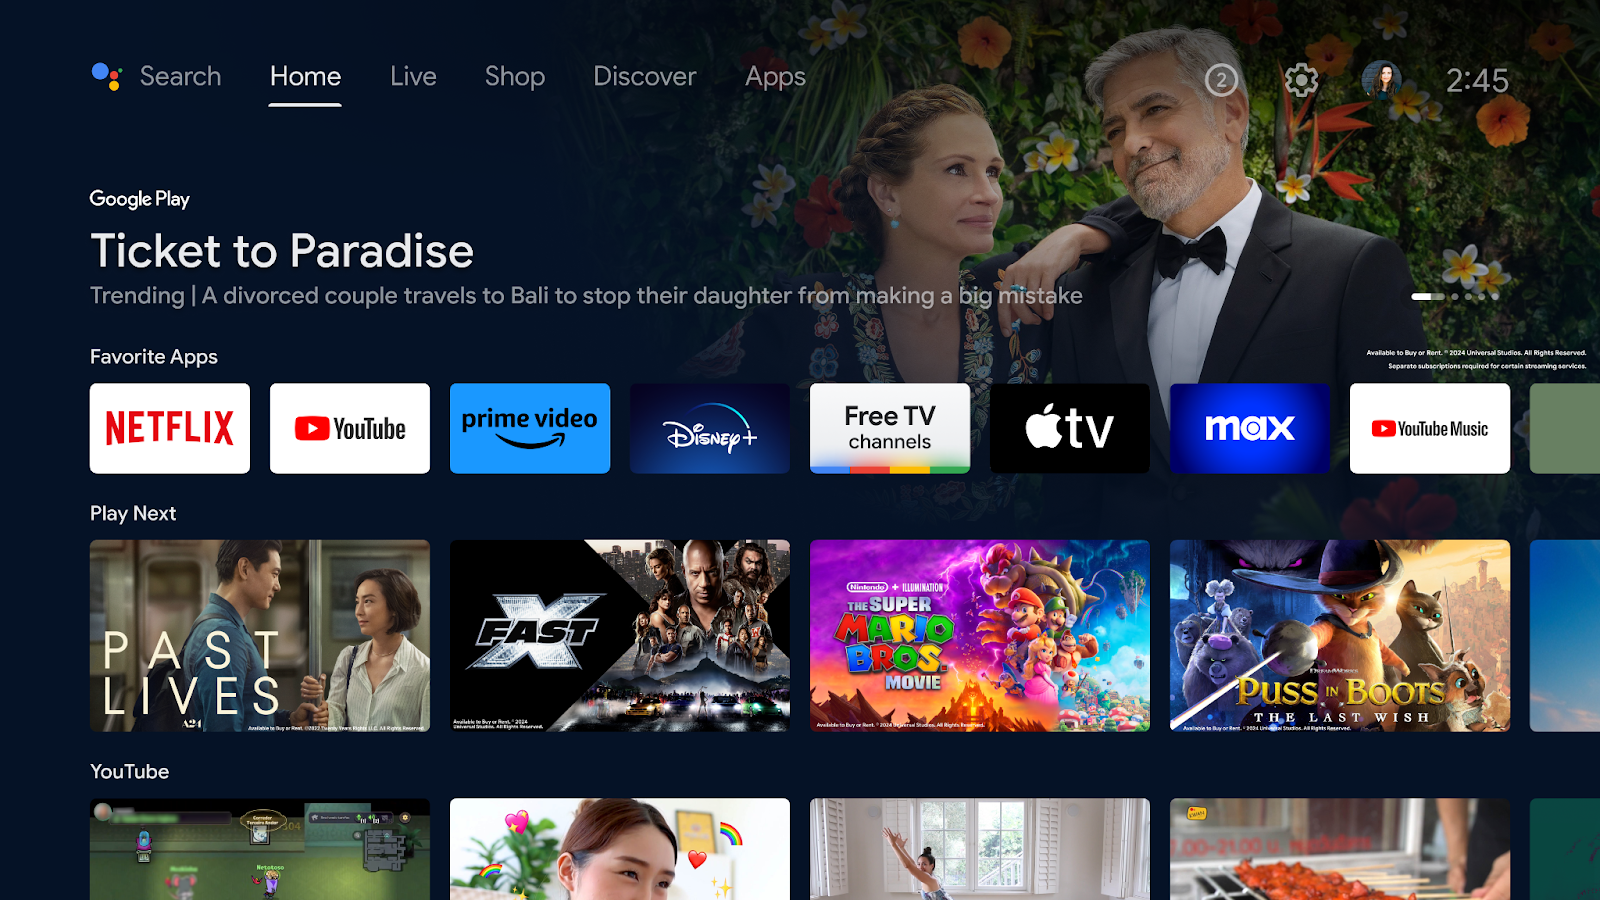 Introducing Free TV channels from Google TV in the Favorite Apps